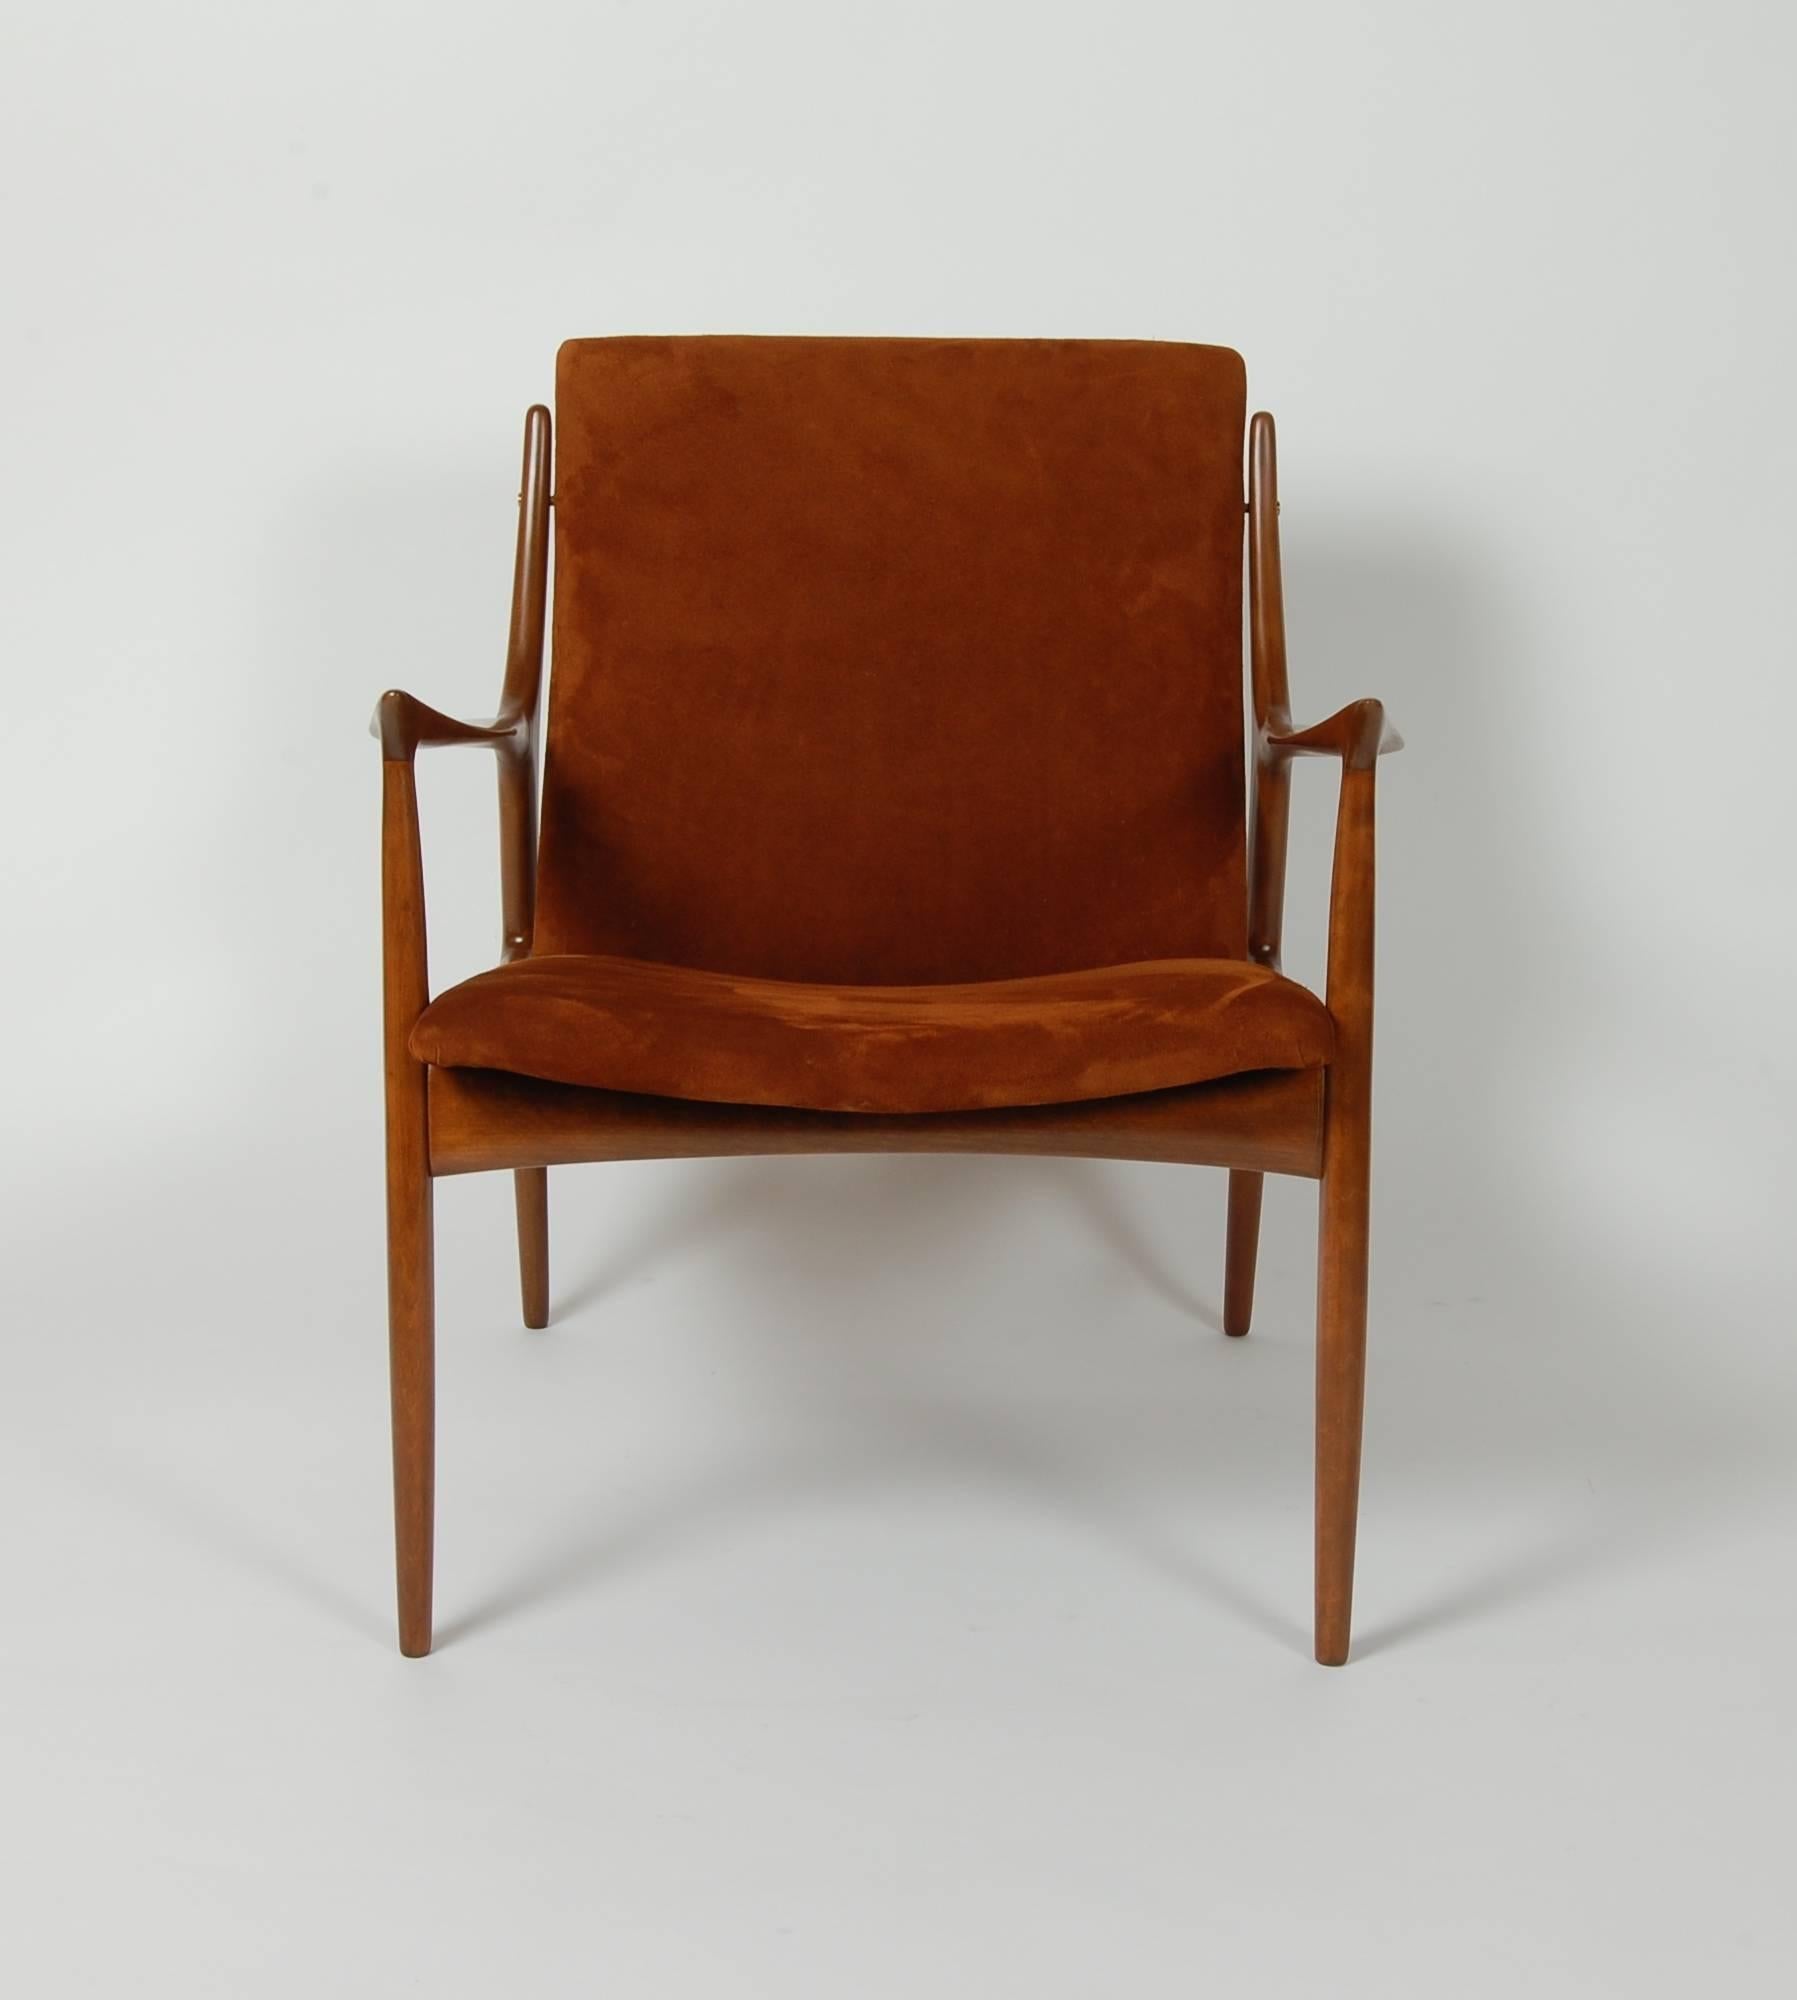 Lacquered Ib Kofod-Larsen Armchair in Suede